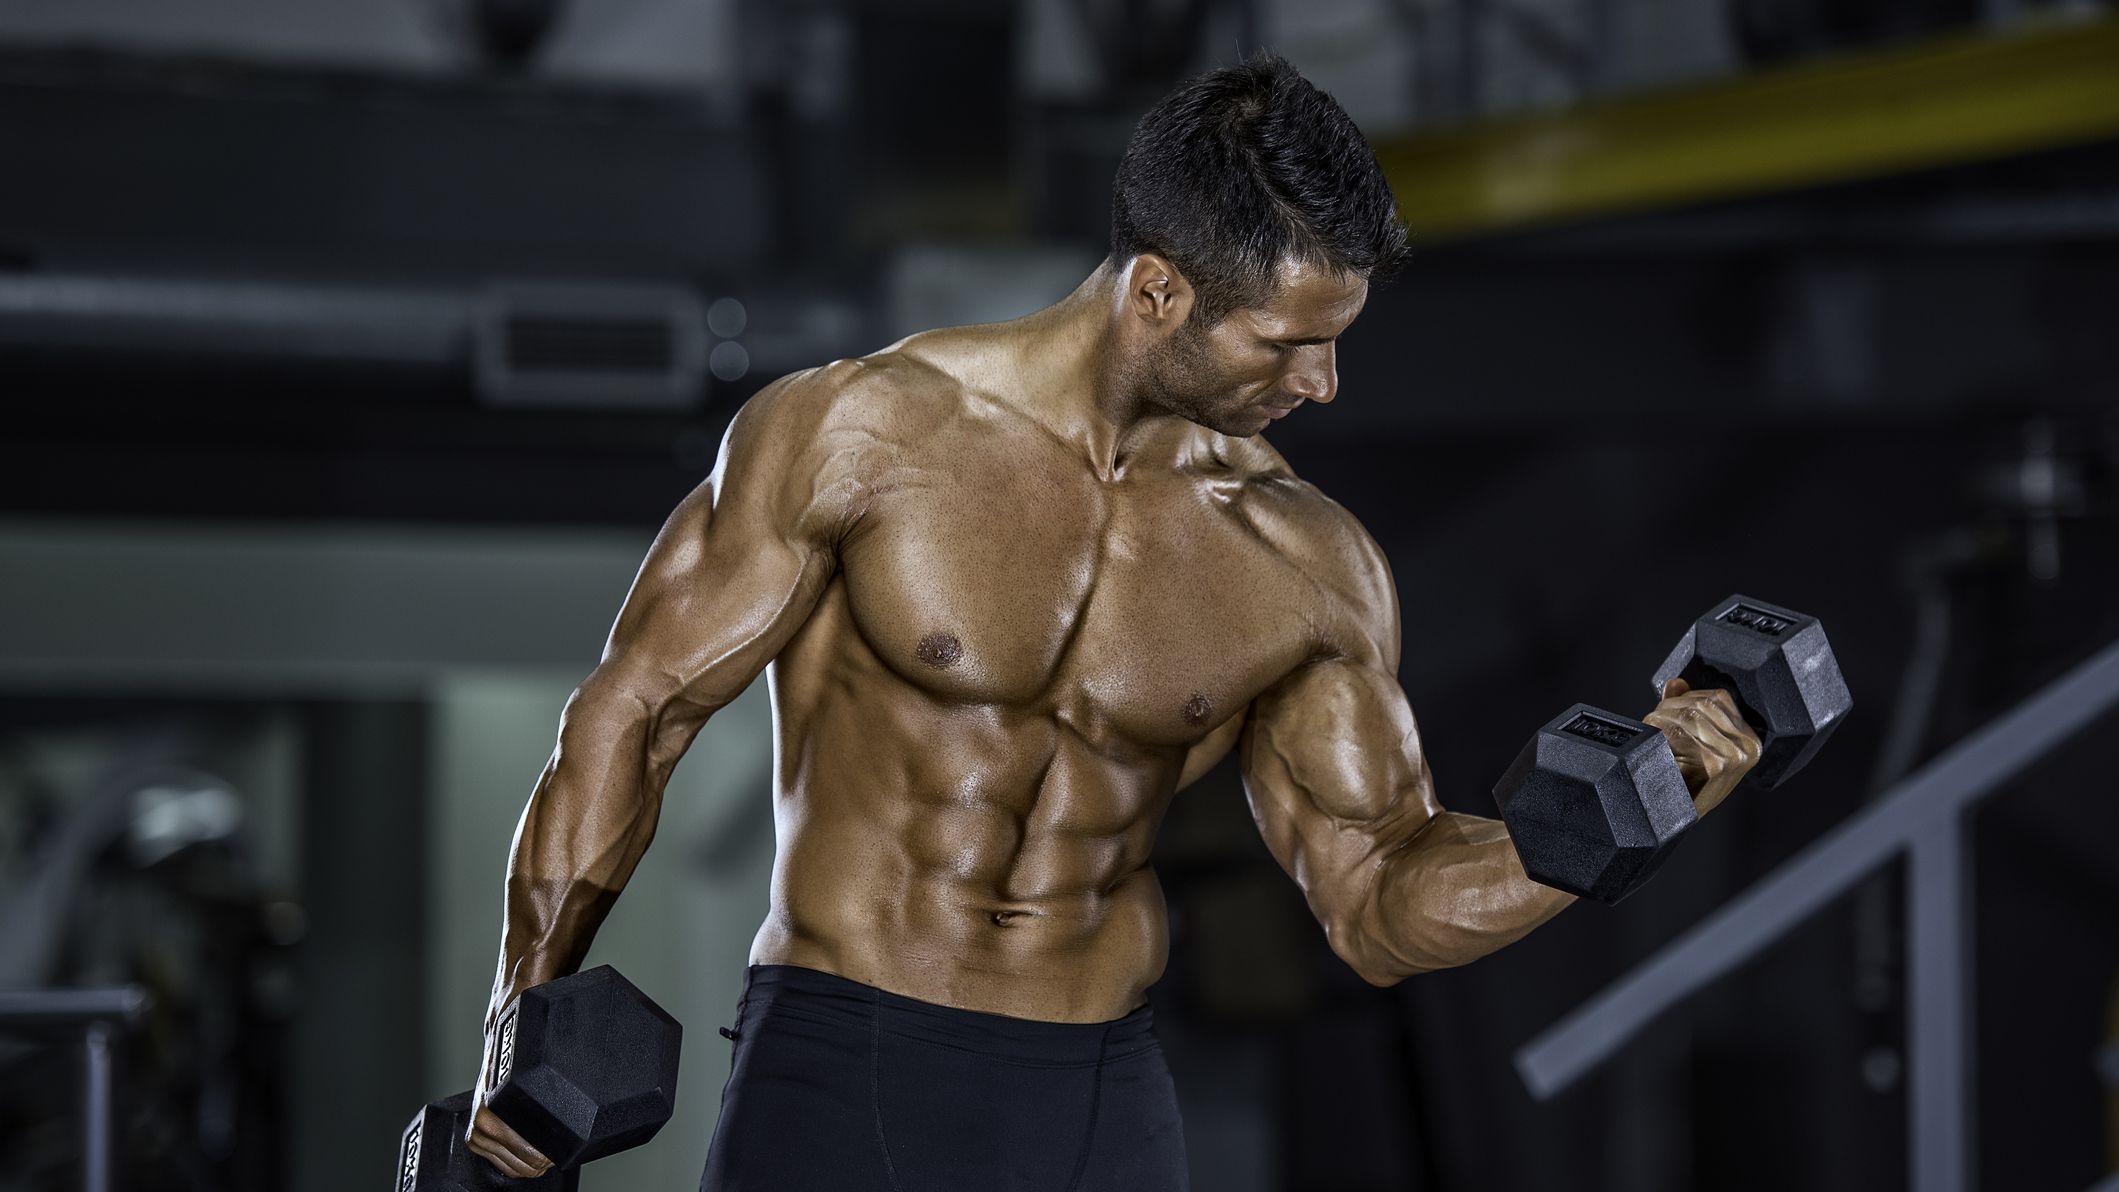 12 Best Forearm Workouts - Exercises for Forearms, Grip Strength